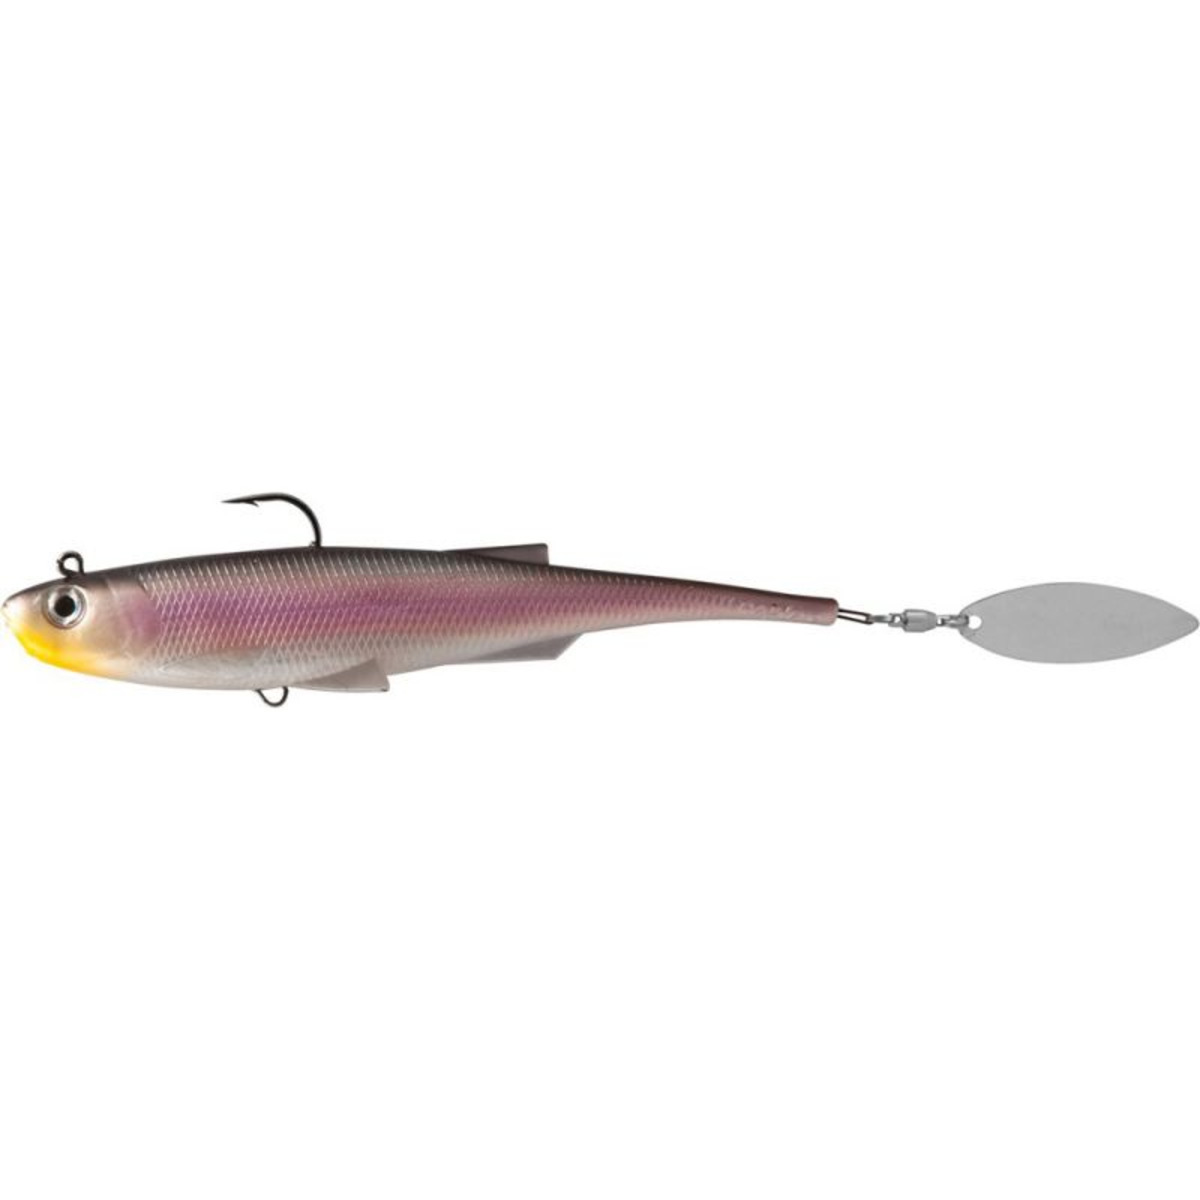 Rapture Mad Spintail Shad - 60.0 g - 150 mm - PG